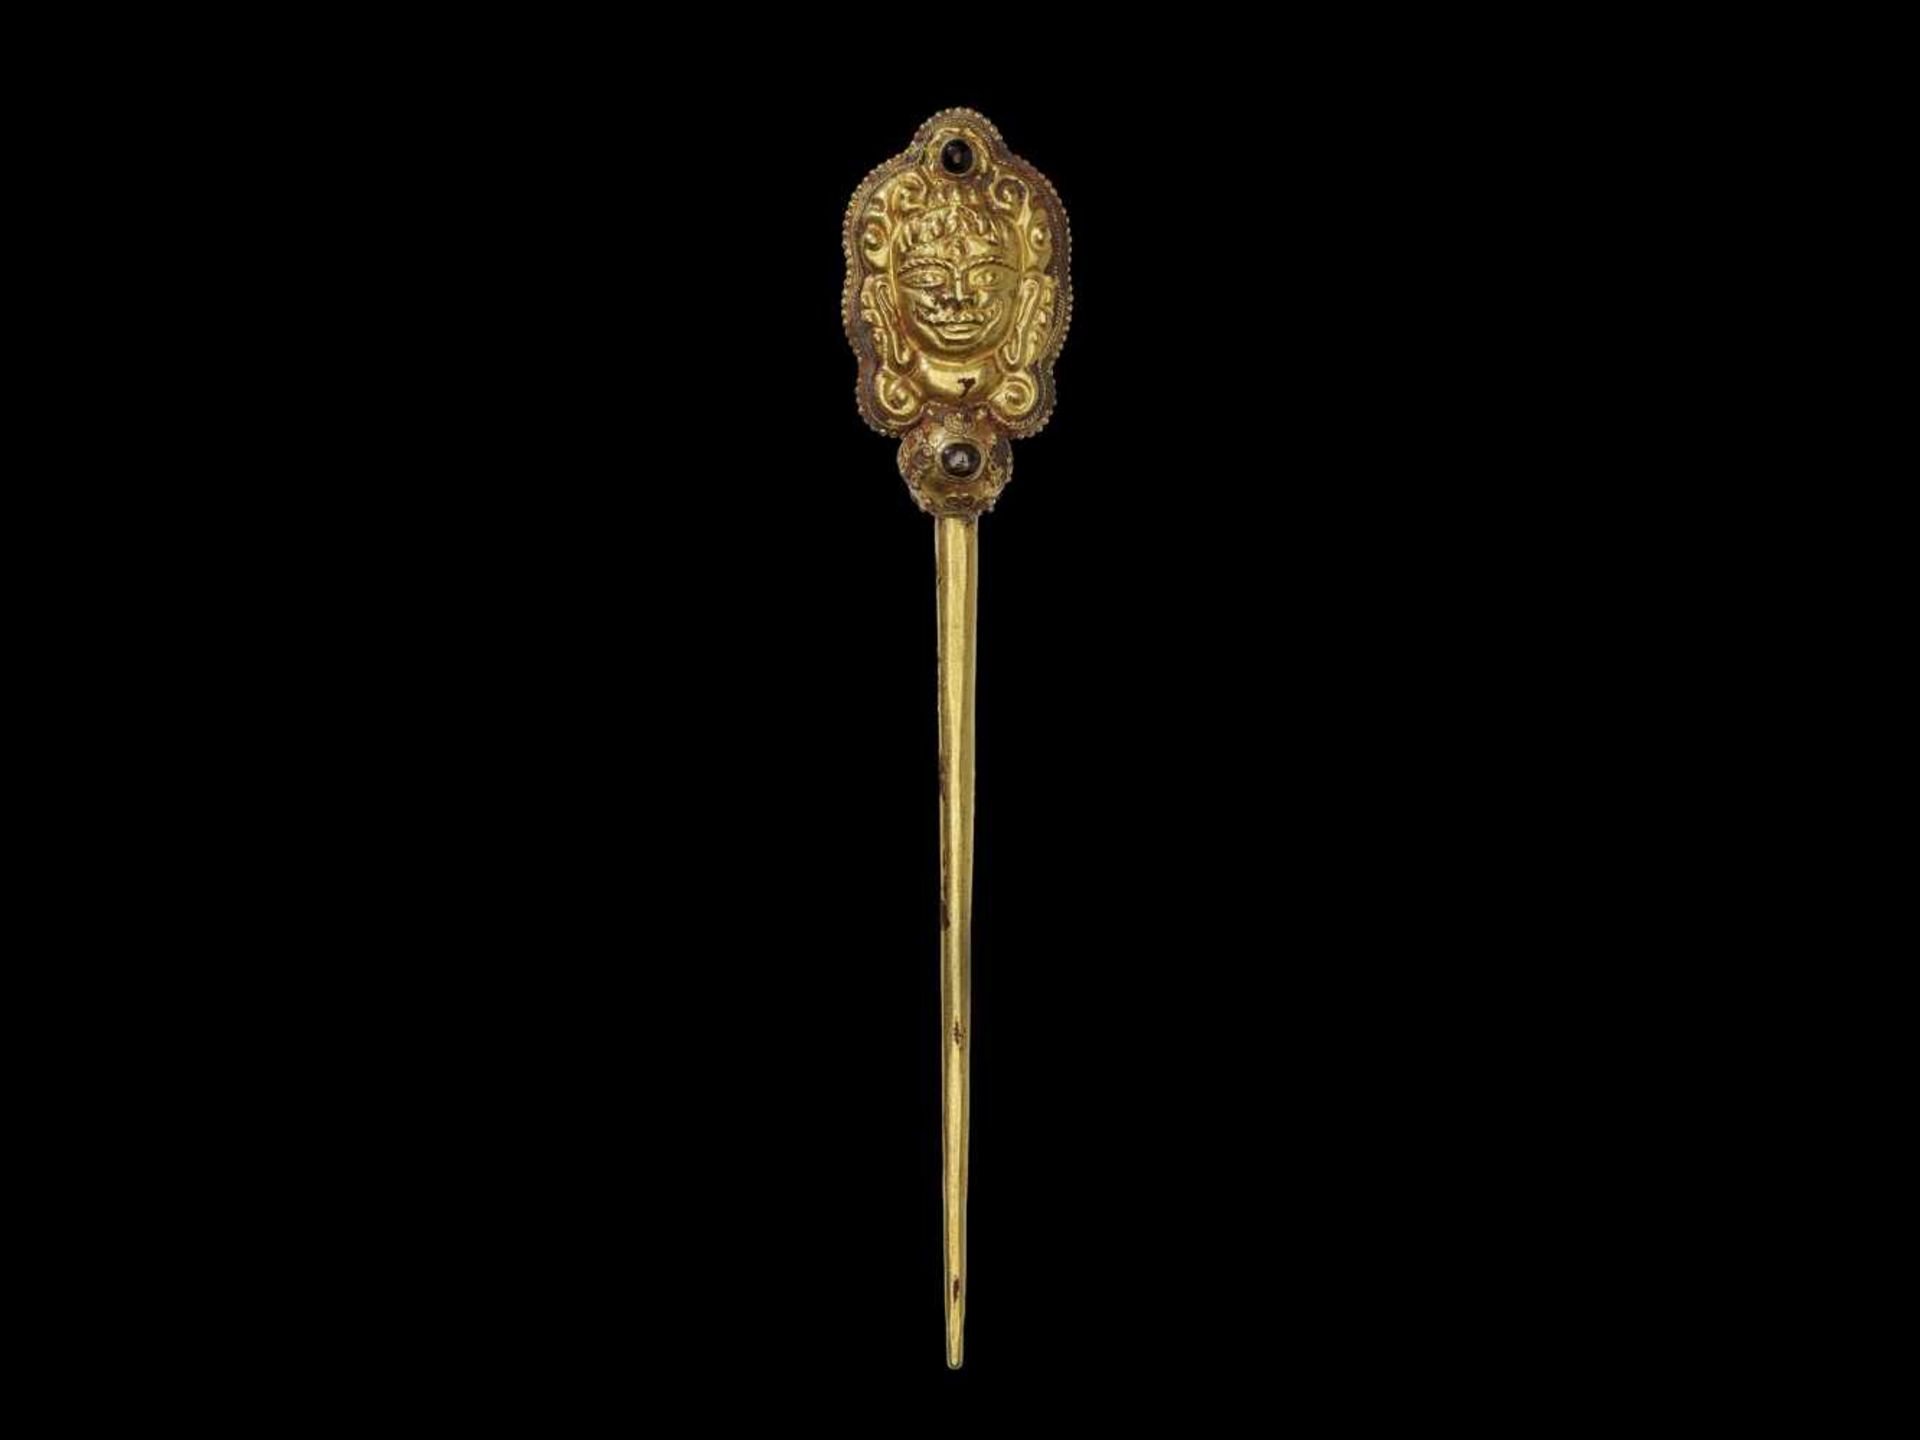 A CHAM GOLD HAIRPIN WITH THE HEAD OF SHIVA AND GEMSTONES Central Cham kingdom, most probably Vijaya,